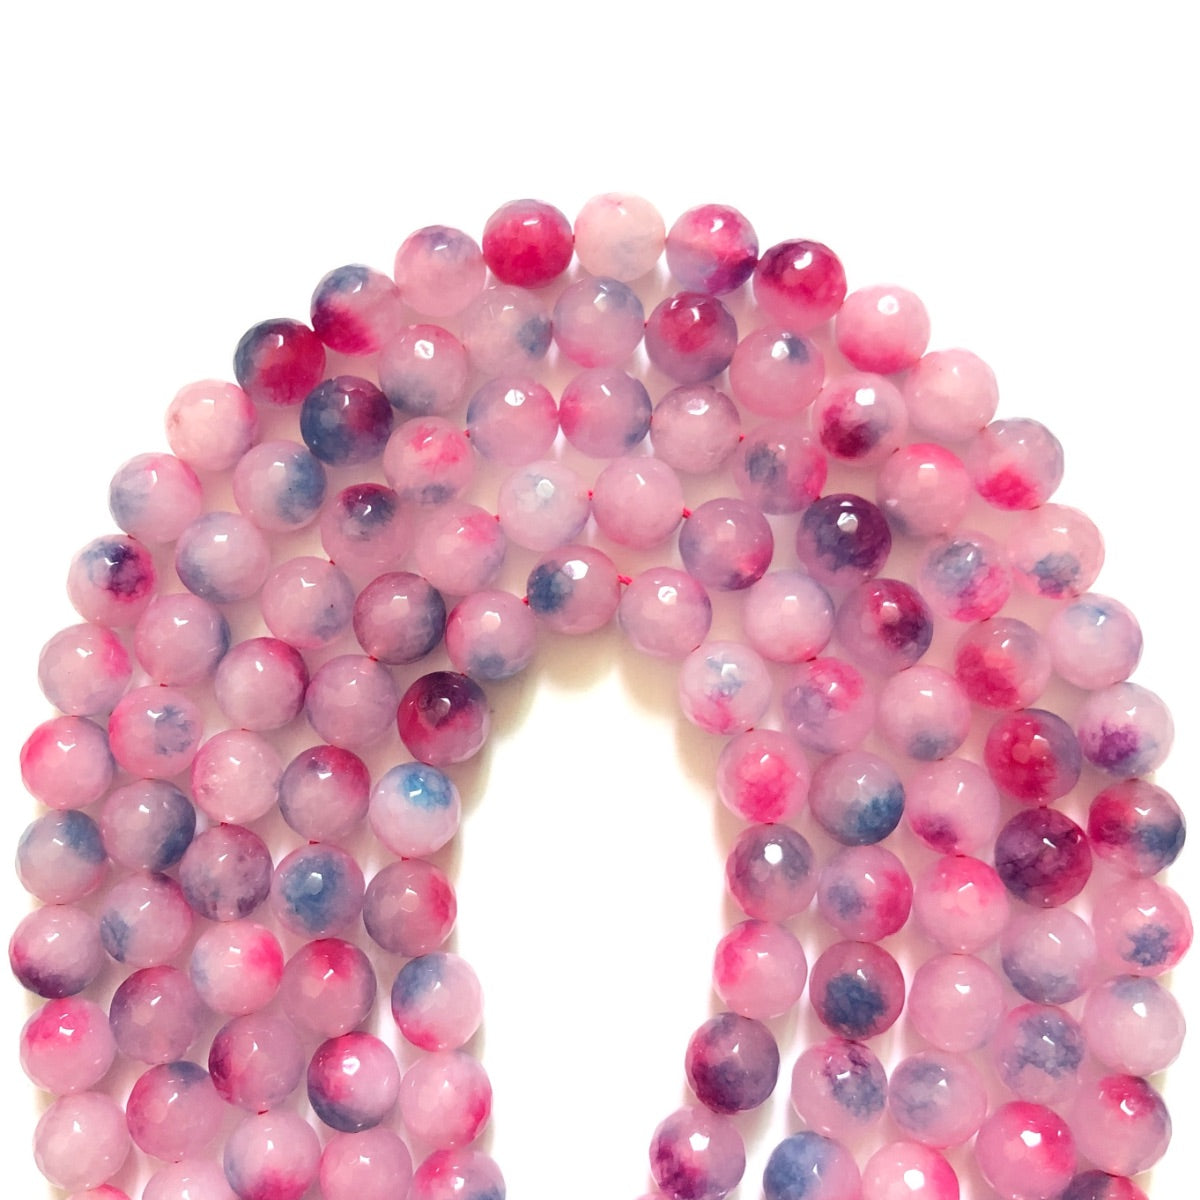 2 Strands/lot 10mm Pink Blue Faceted Jade Stone Beads Stone Beads Faceted Jade Beads New Beads Arrivals Charms Beads Beyond